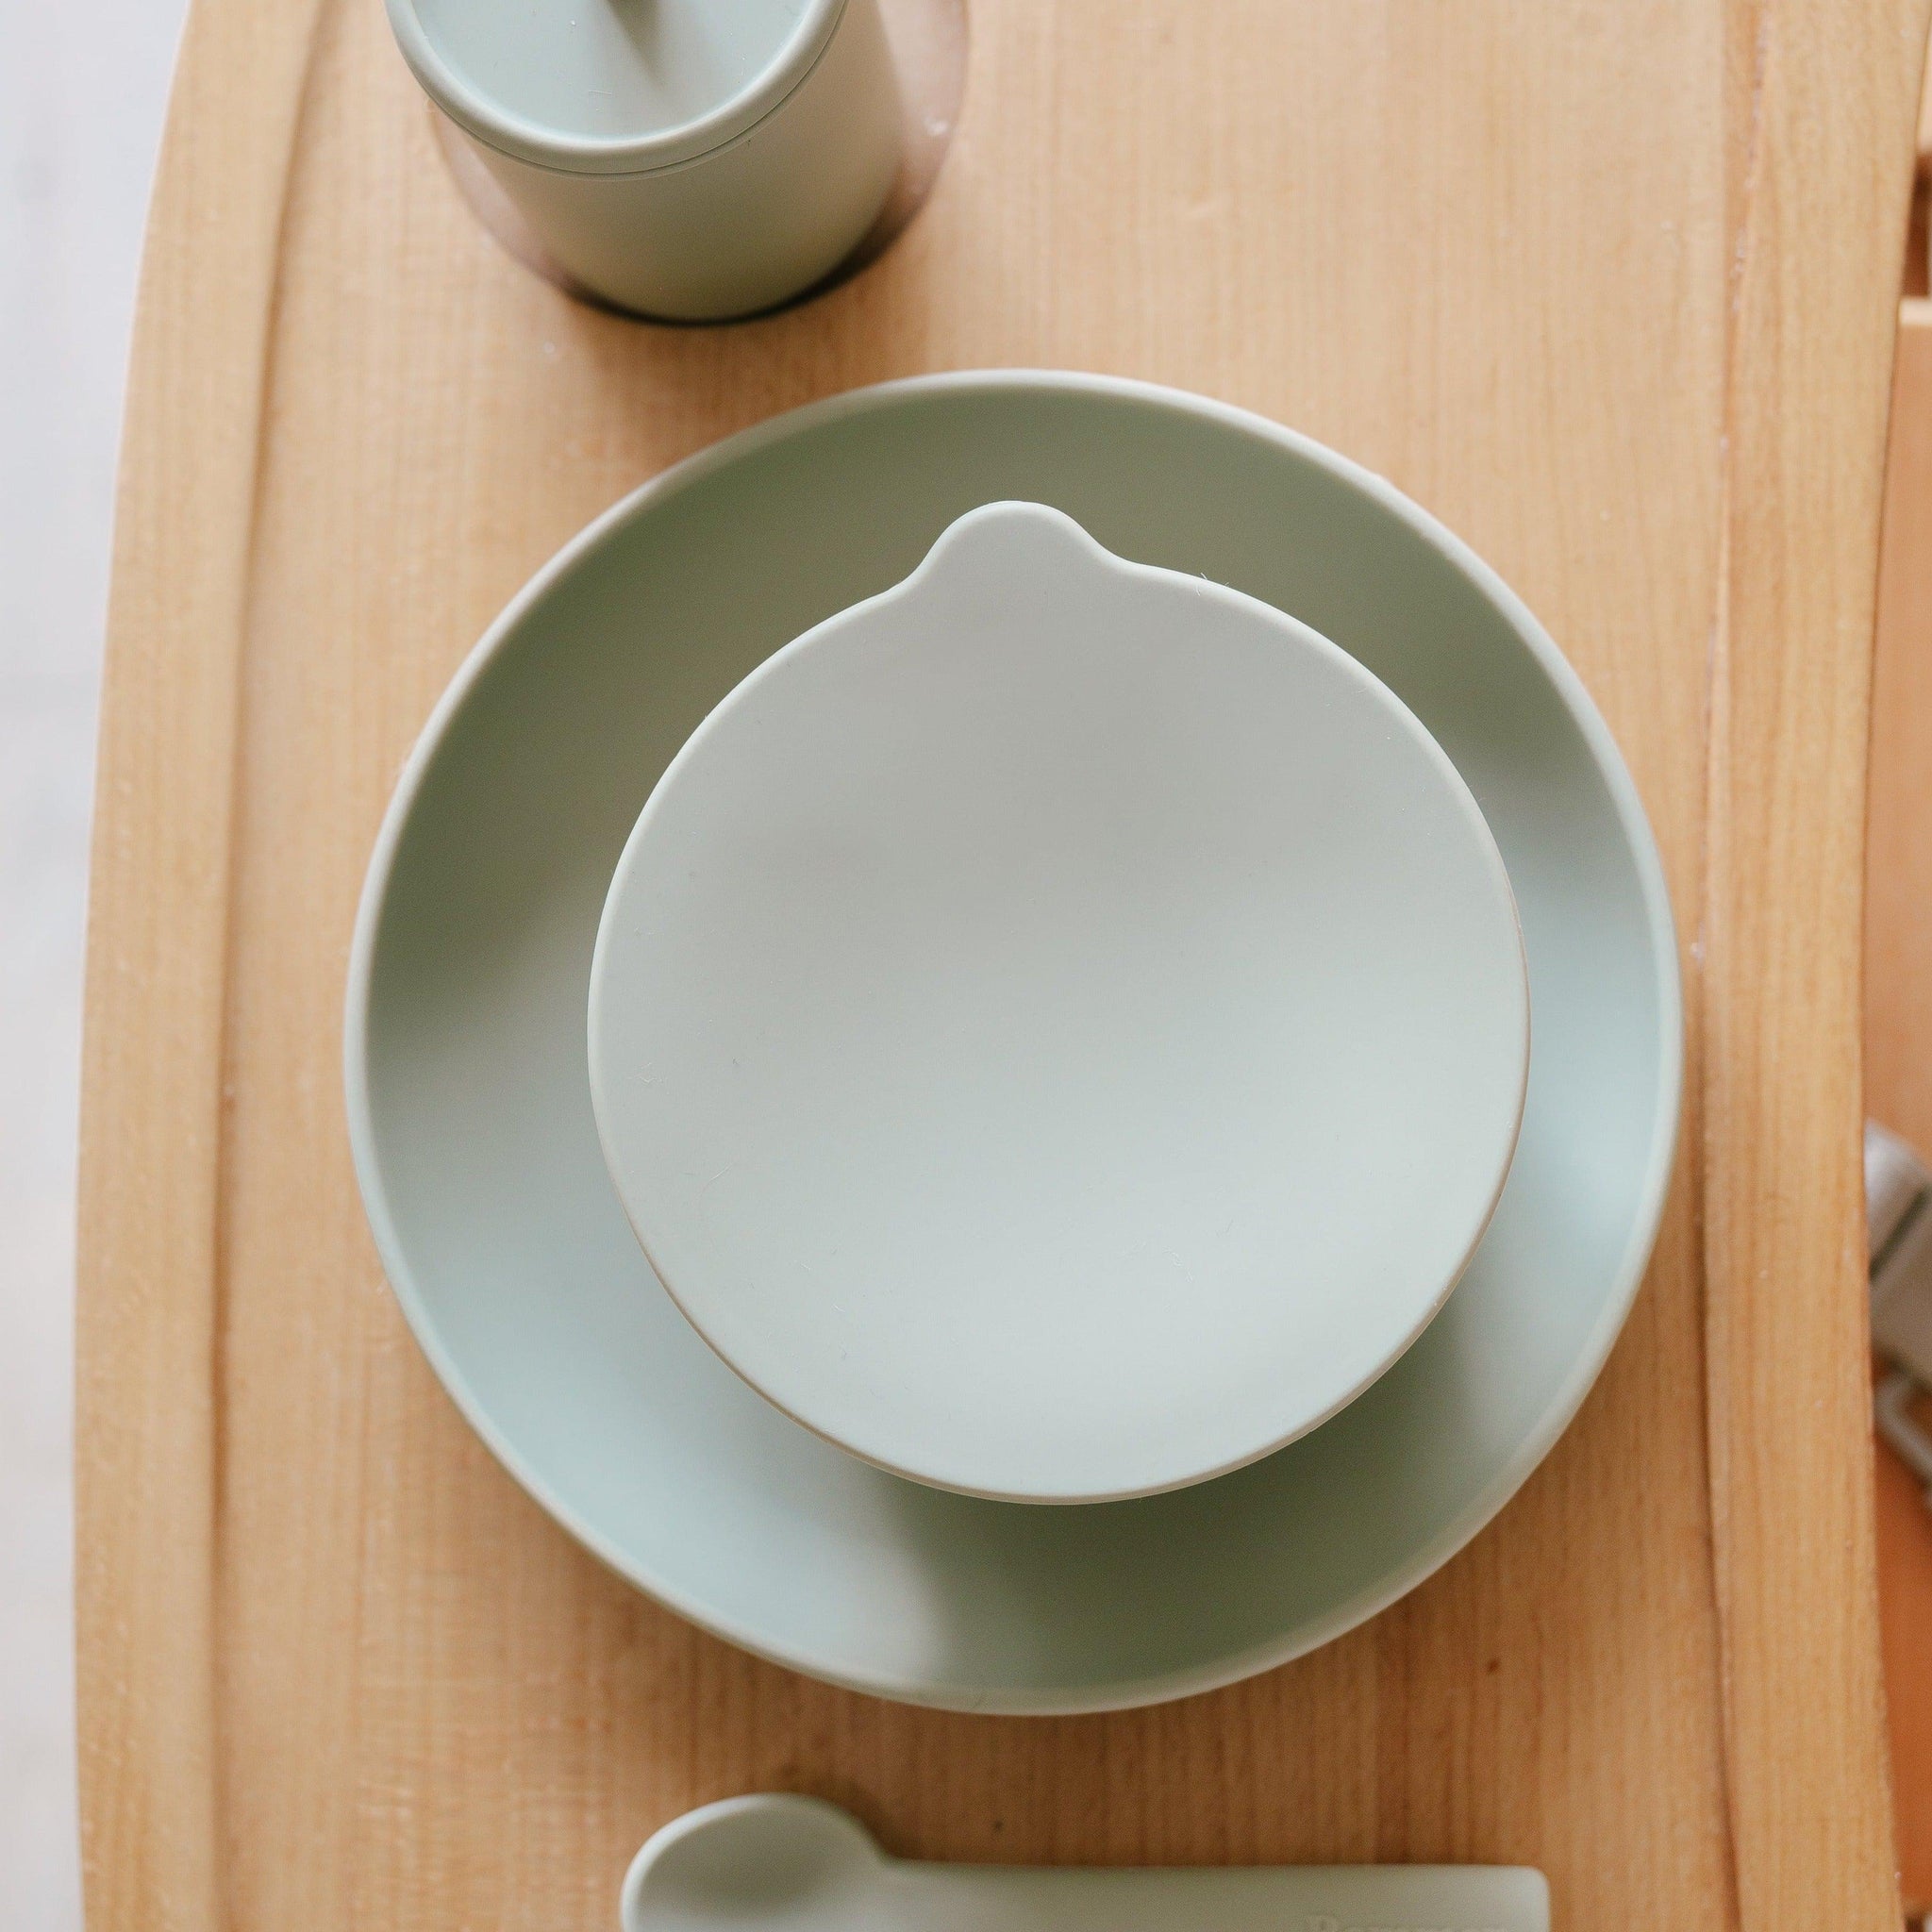 A Rommer dinner set of plates and utensils on a wooden table.